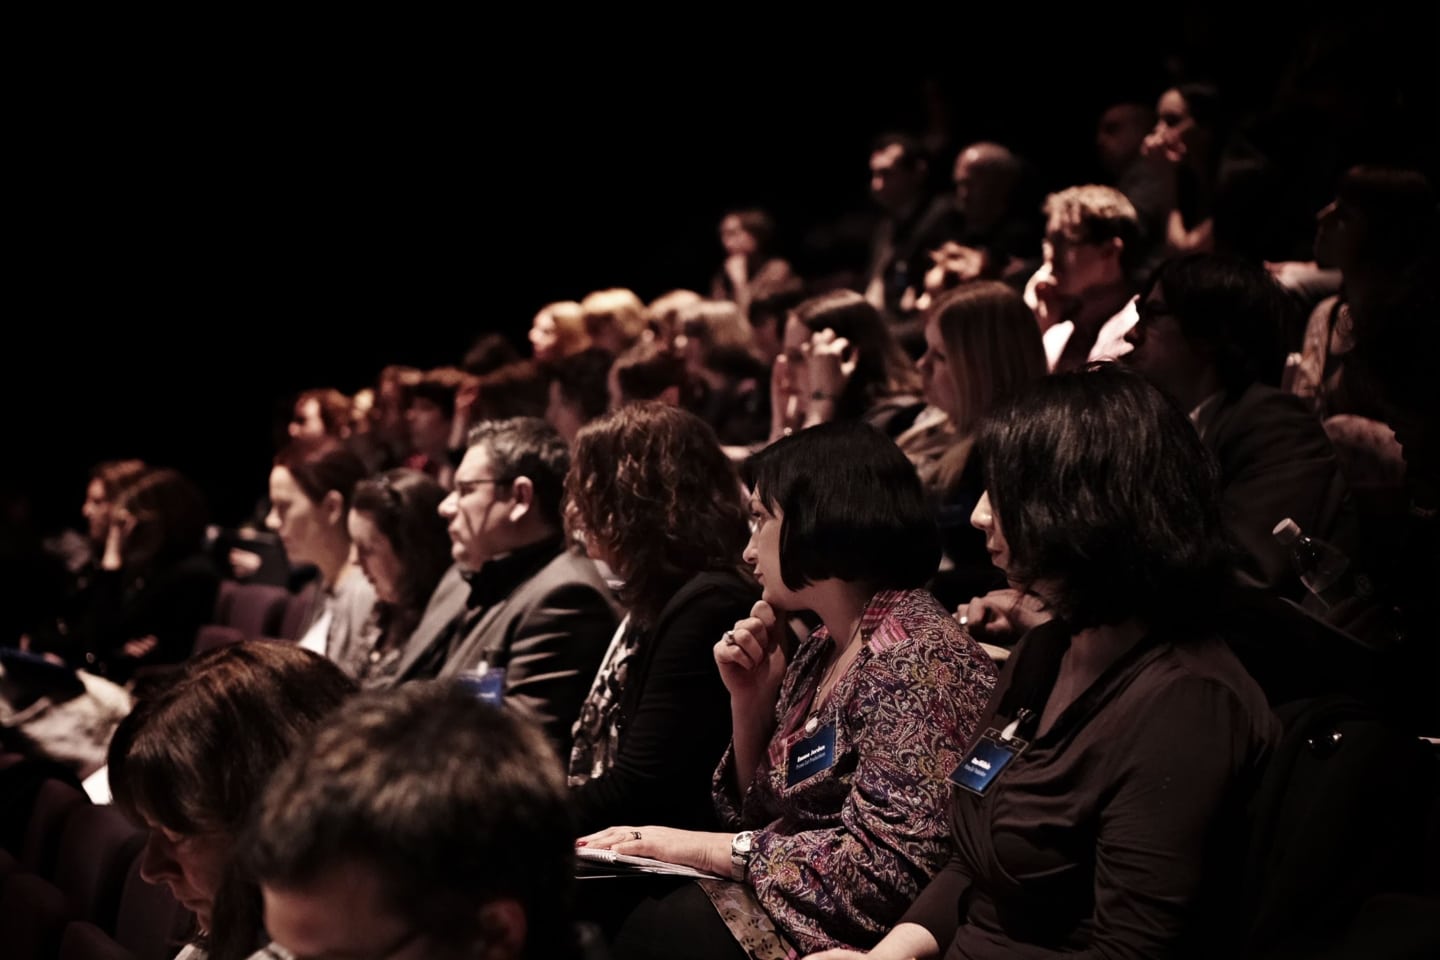 Theatre audience photograph